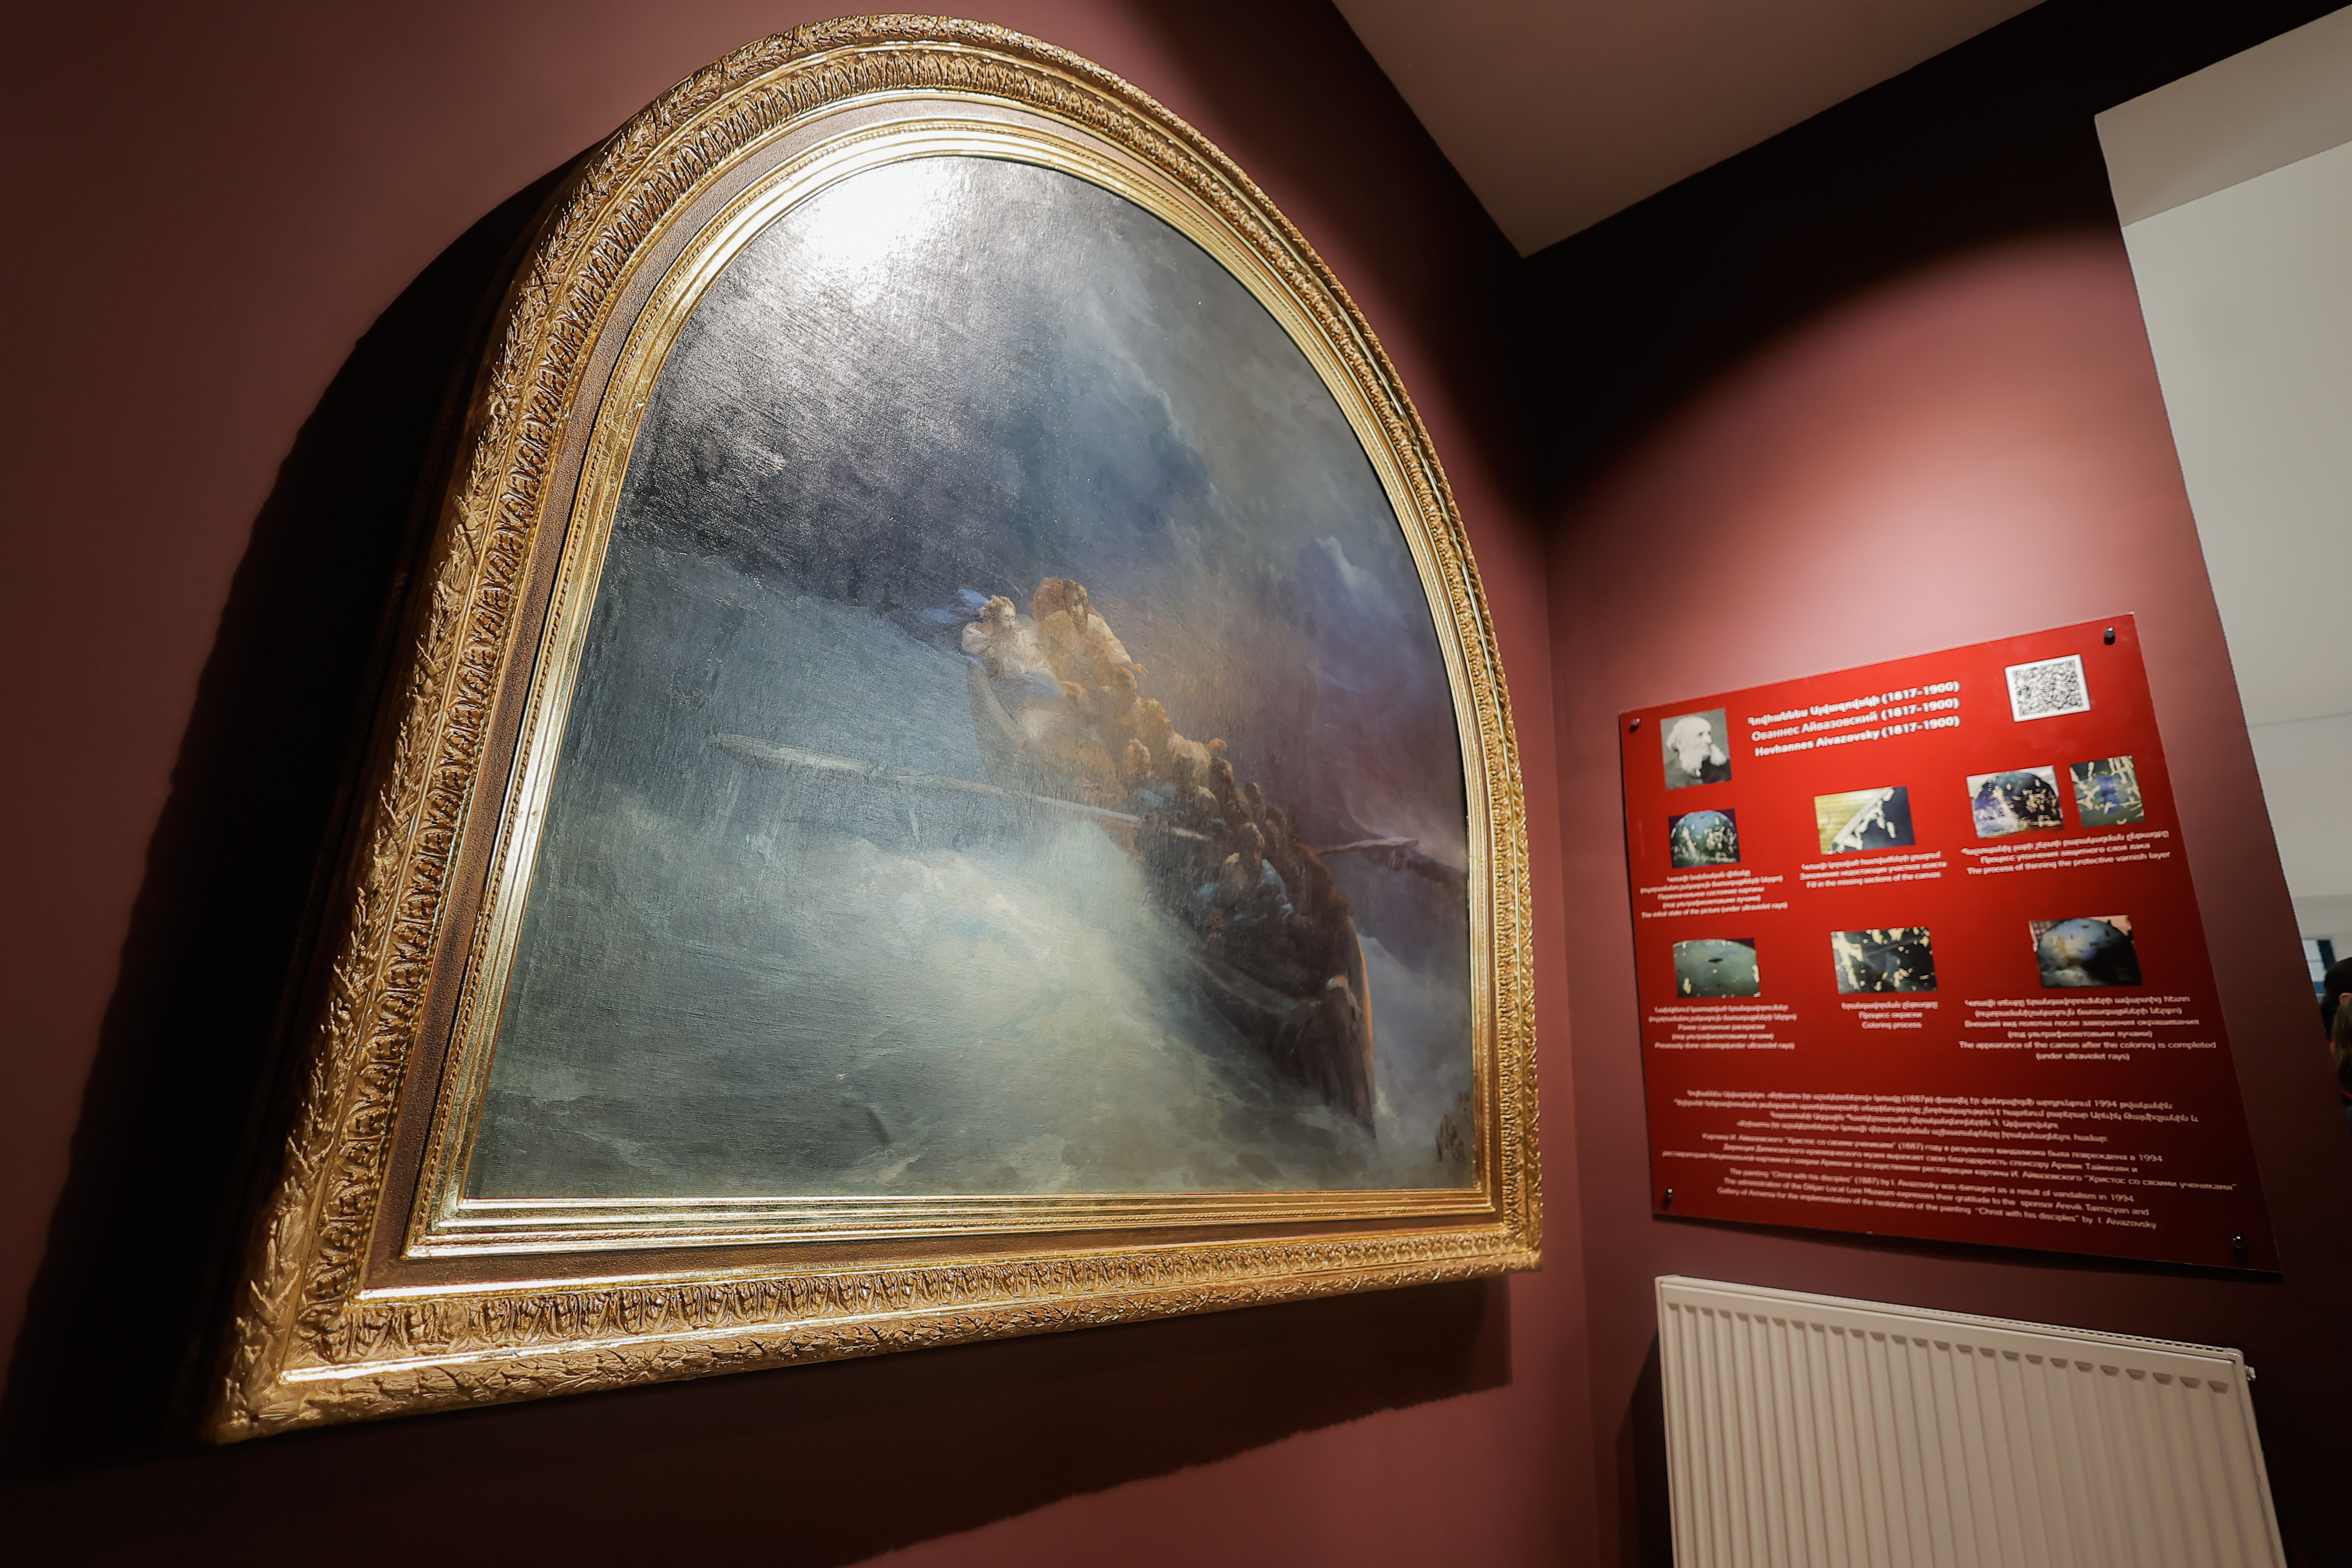 ARARAT Supports the Official Opening of Ivan Aivazovsky’s “Christ with His Disciples” Painting